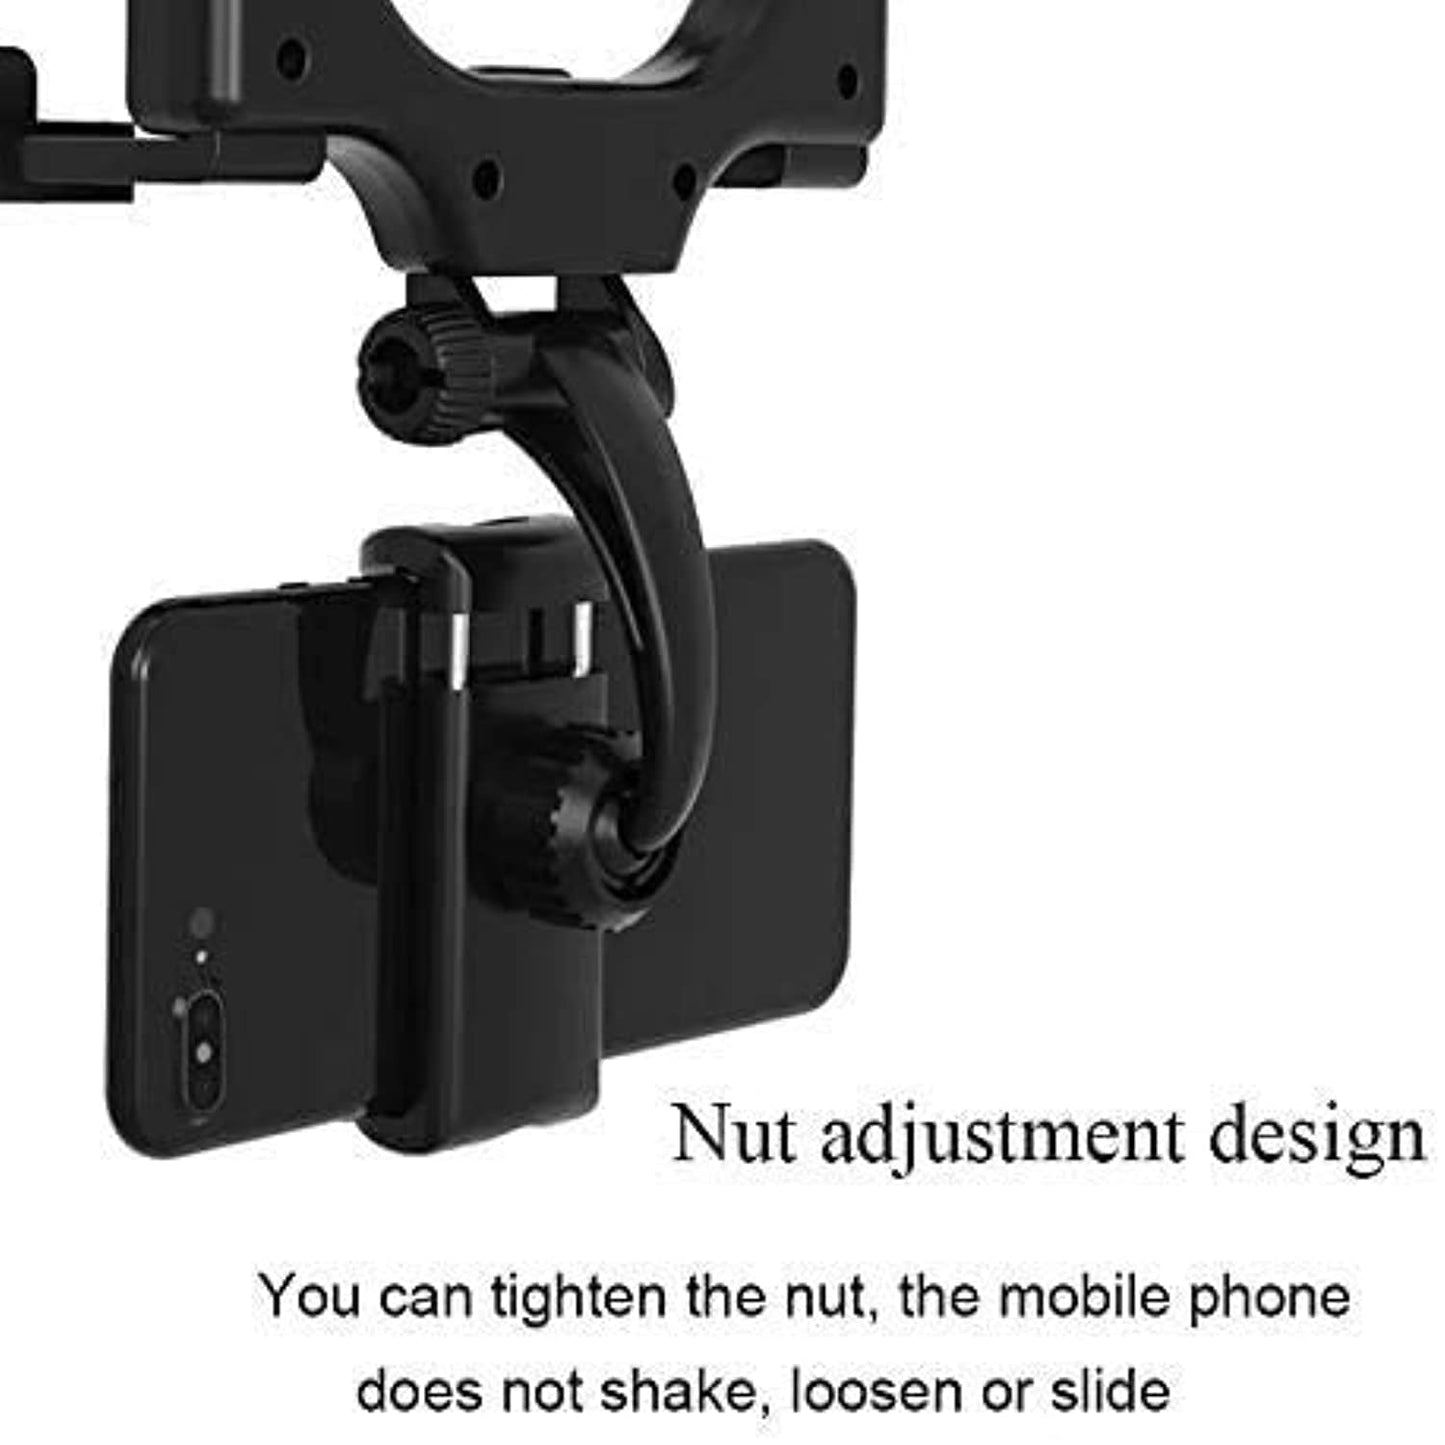 360 Rotation Adjustable Car Rearview Mirror Mount Phone Holder GPS Stand Universal Navigate Support Automobile Data Recorder Bracket Easy to Install Applicable to 99% of Car Models